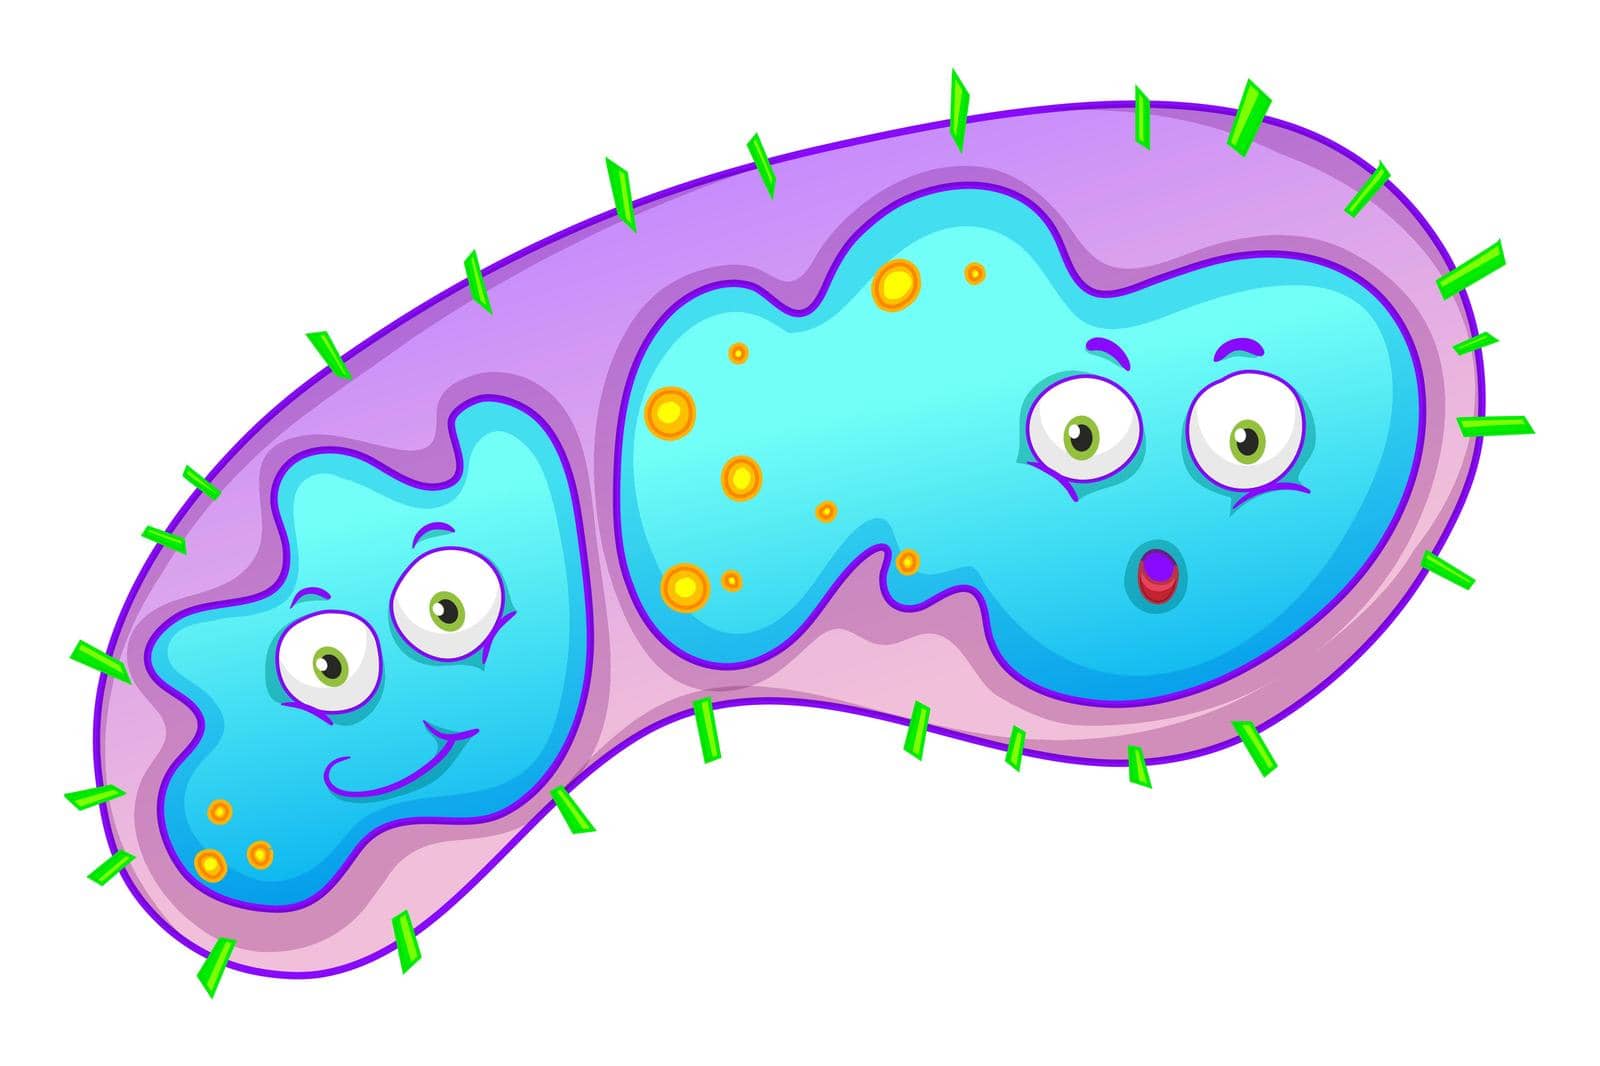 Bacteria with happy face illustration